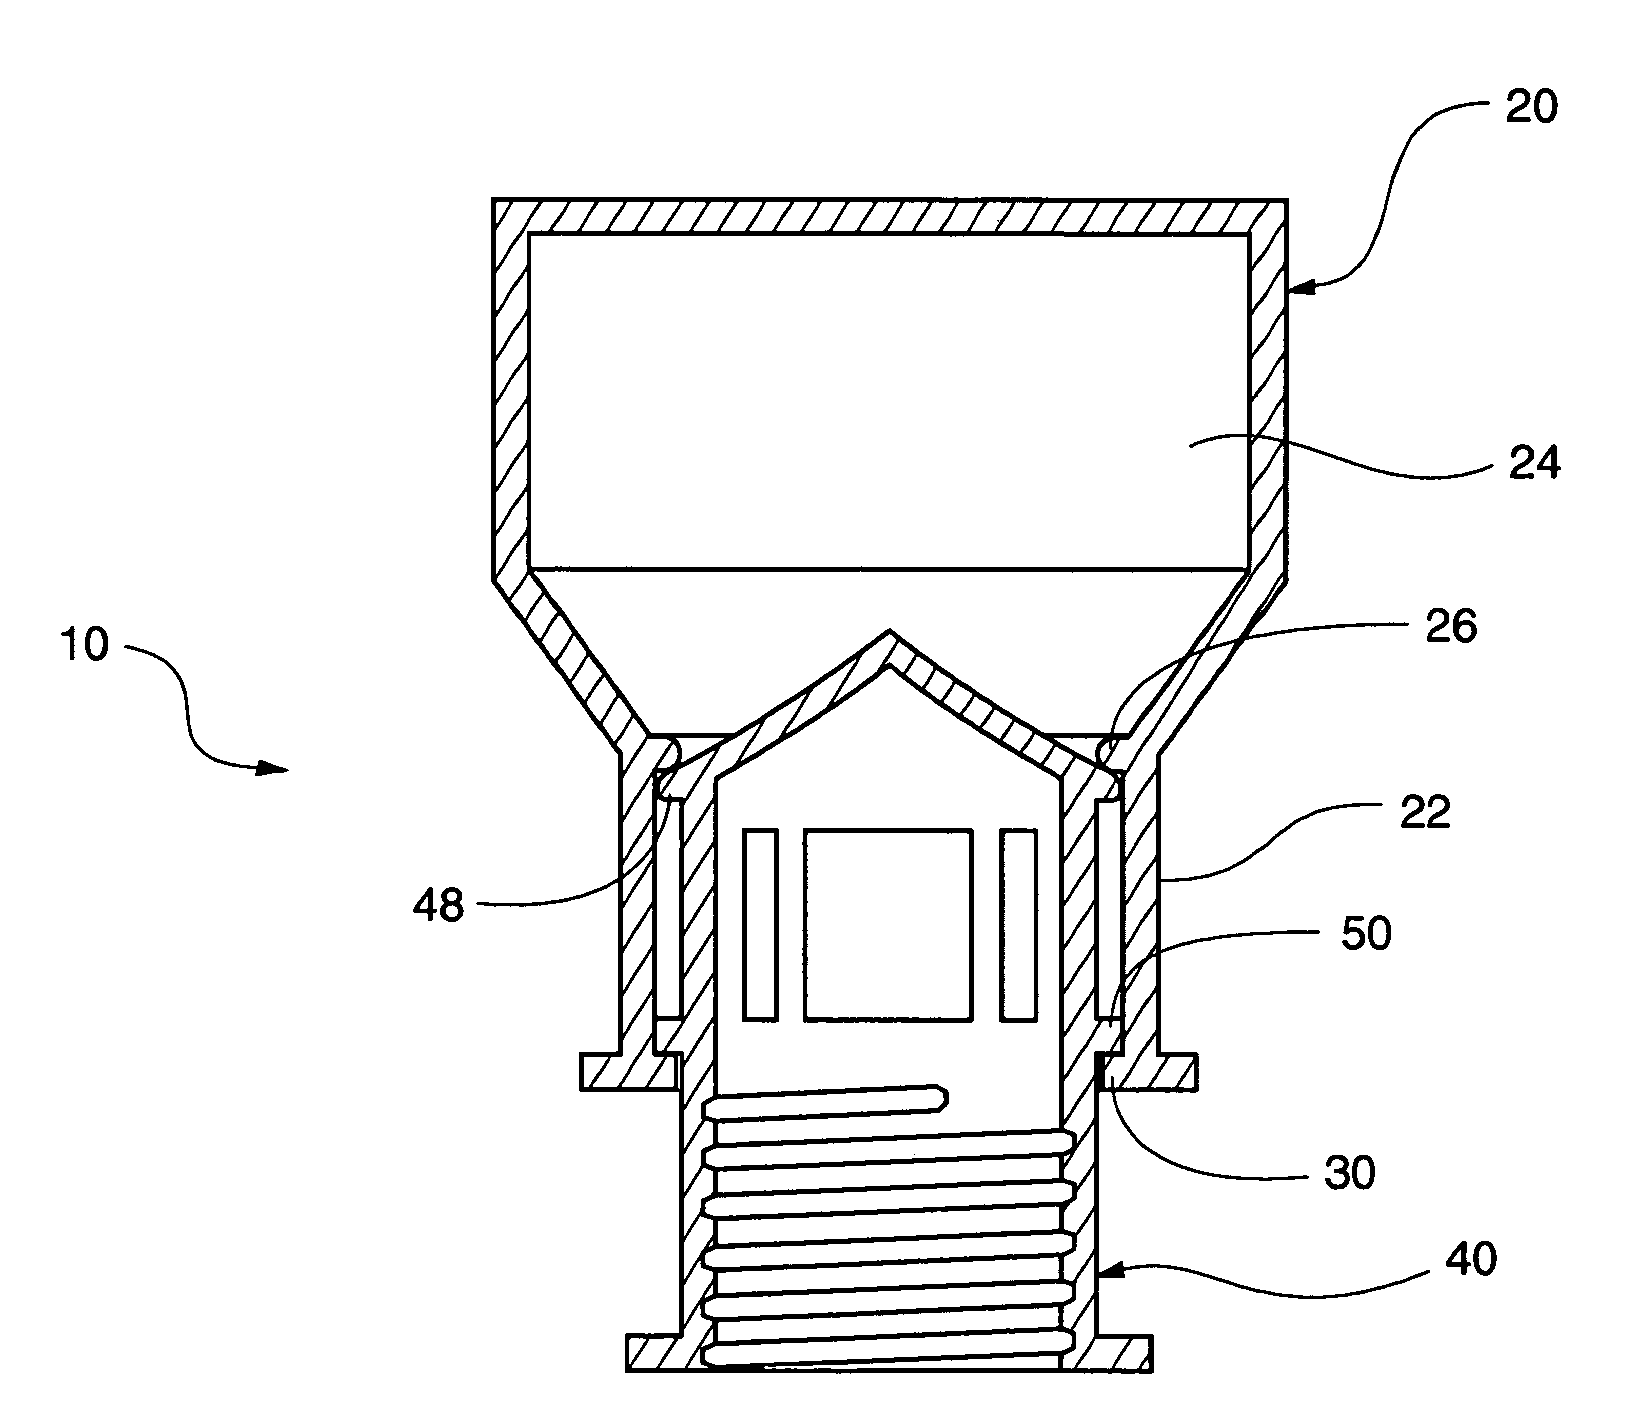 Mixing cap and method for use thereof